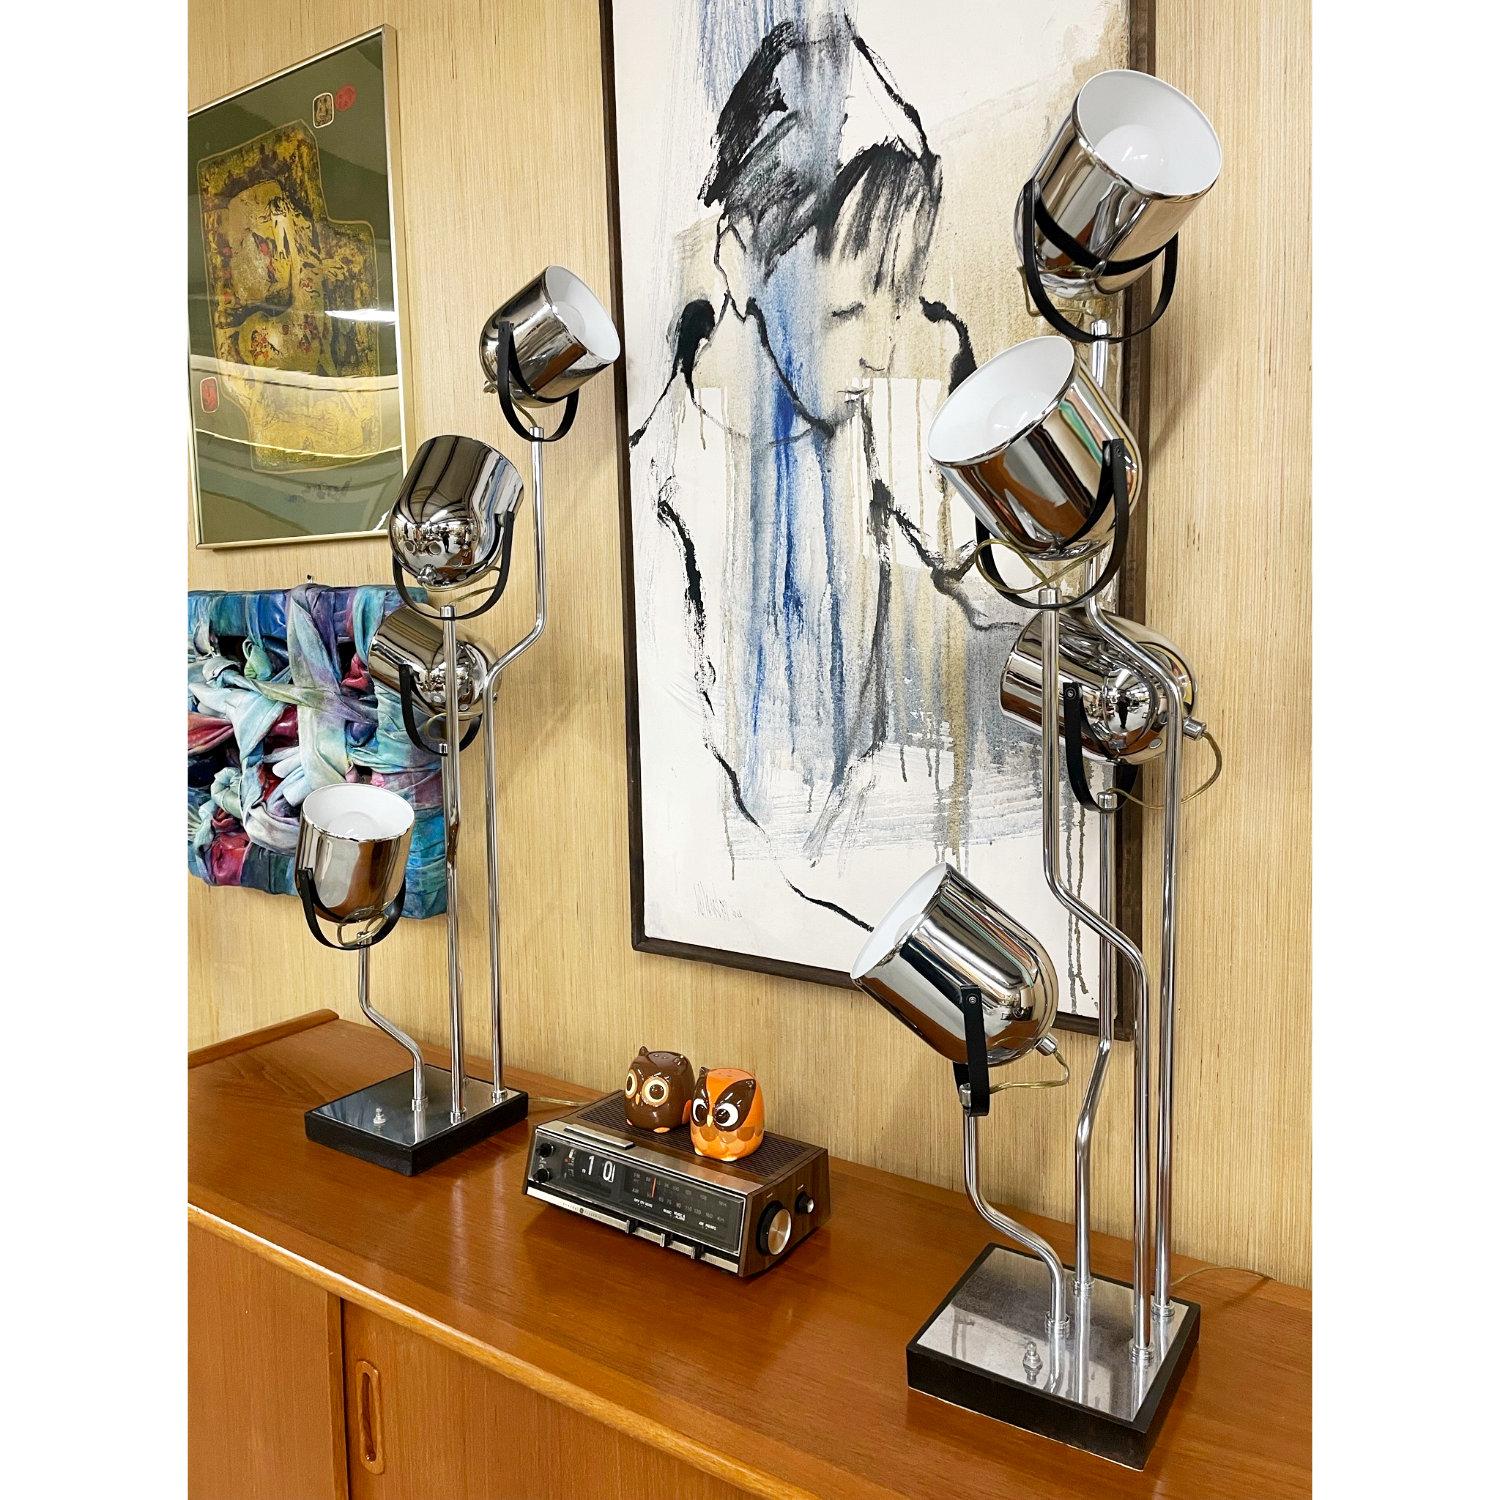 Stunning pair of Post-Modern chrome spotlight lamps by Goffredo Reggiani. These Italian made lamps each feature four spotlight heads. The heads are articulating, adjust the tilt and rotate the heads to desired positioned. They are four-way lamps.